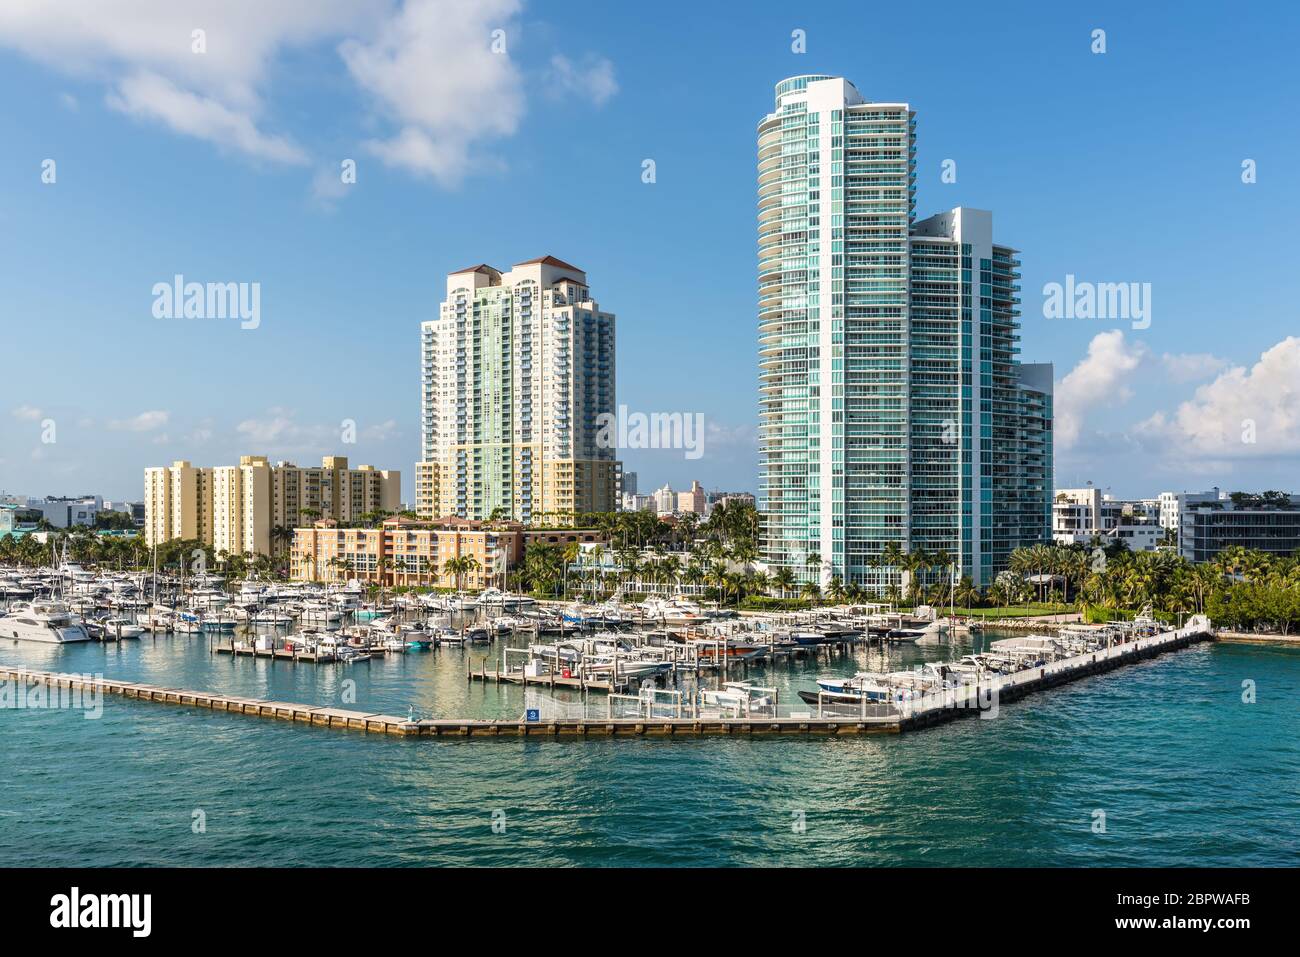 Miami, FL, United States - April 28, 2019: Luxury high-rise condominiums overlooking boat parking on the Florida Intra-Coastal Waterway (Meloy Channel Stock Photo